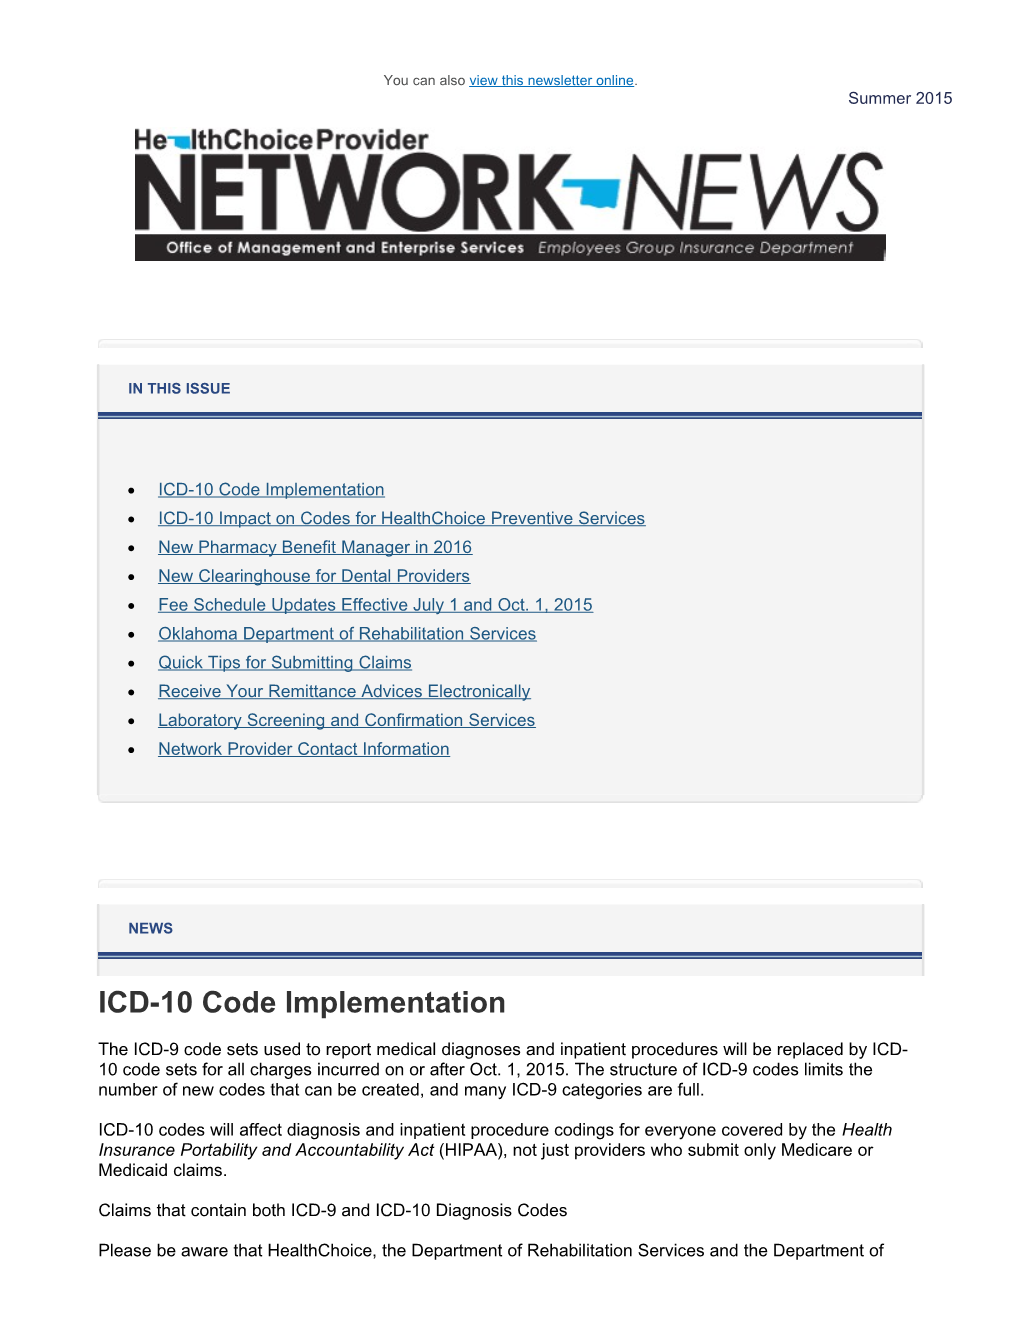 ICD-10 Impact on Codes for Healthchoice Preventive Services